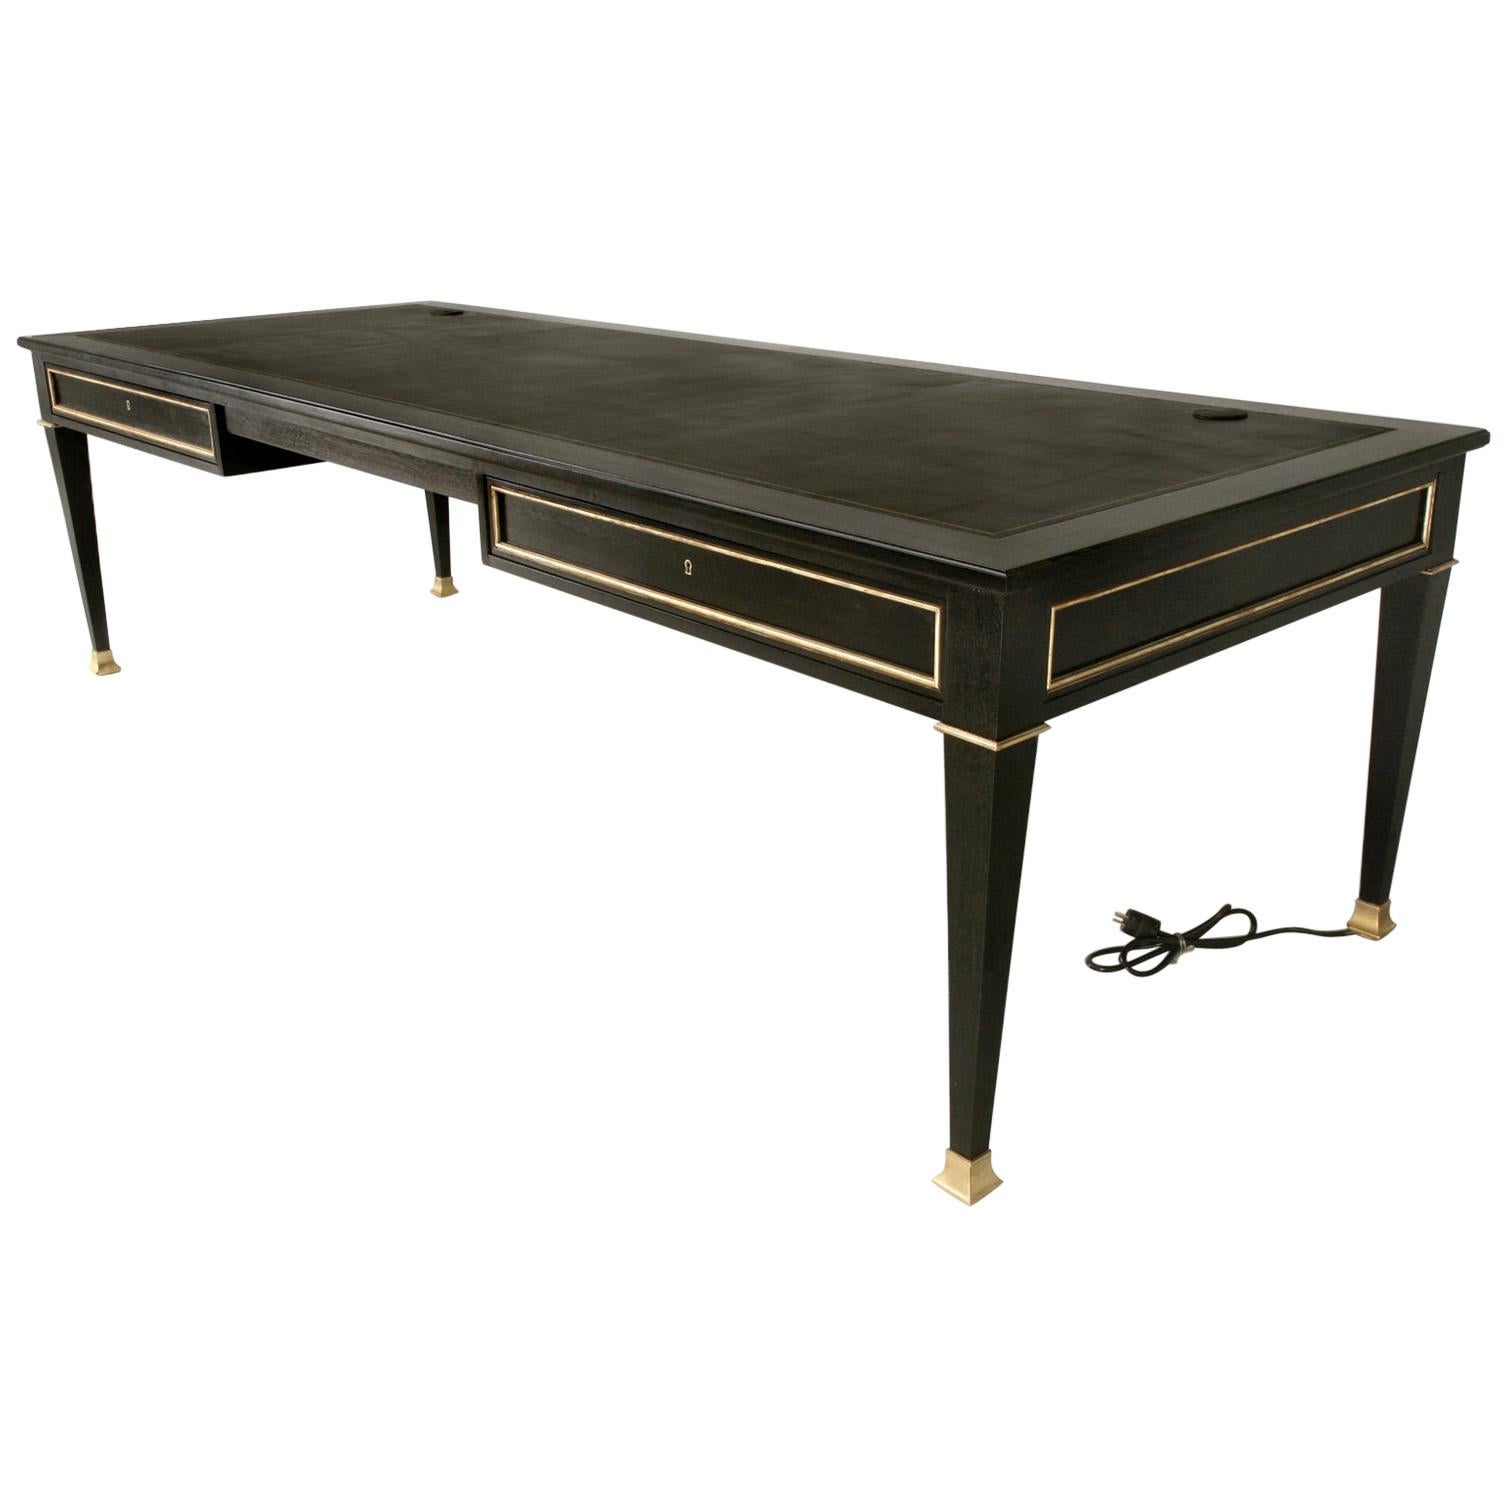 Maison Jansen Inspired French Louis XVI Ebonized Desk Available in Any Dimension For Sale